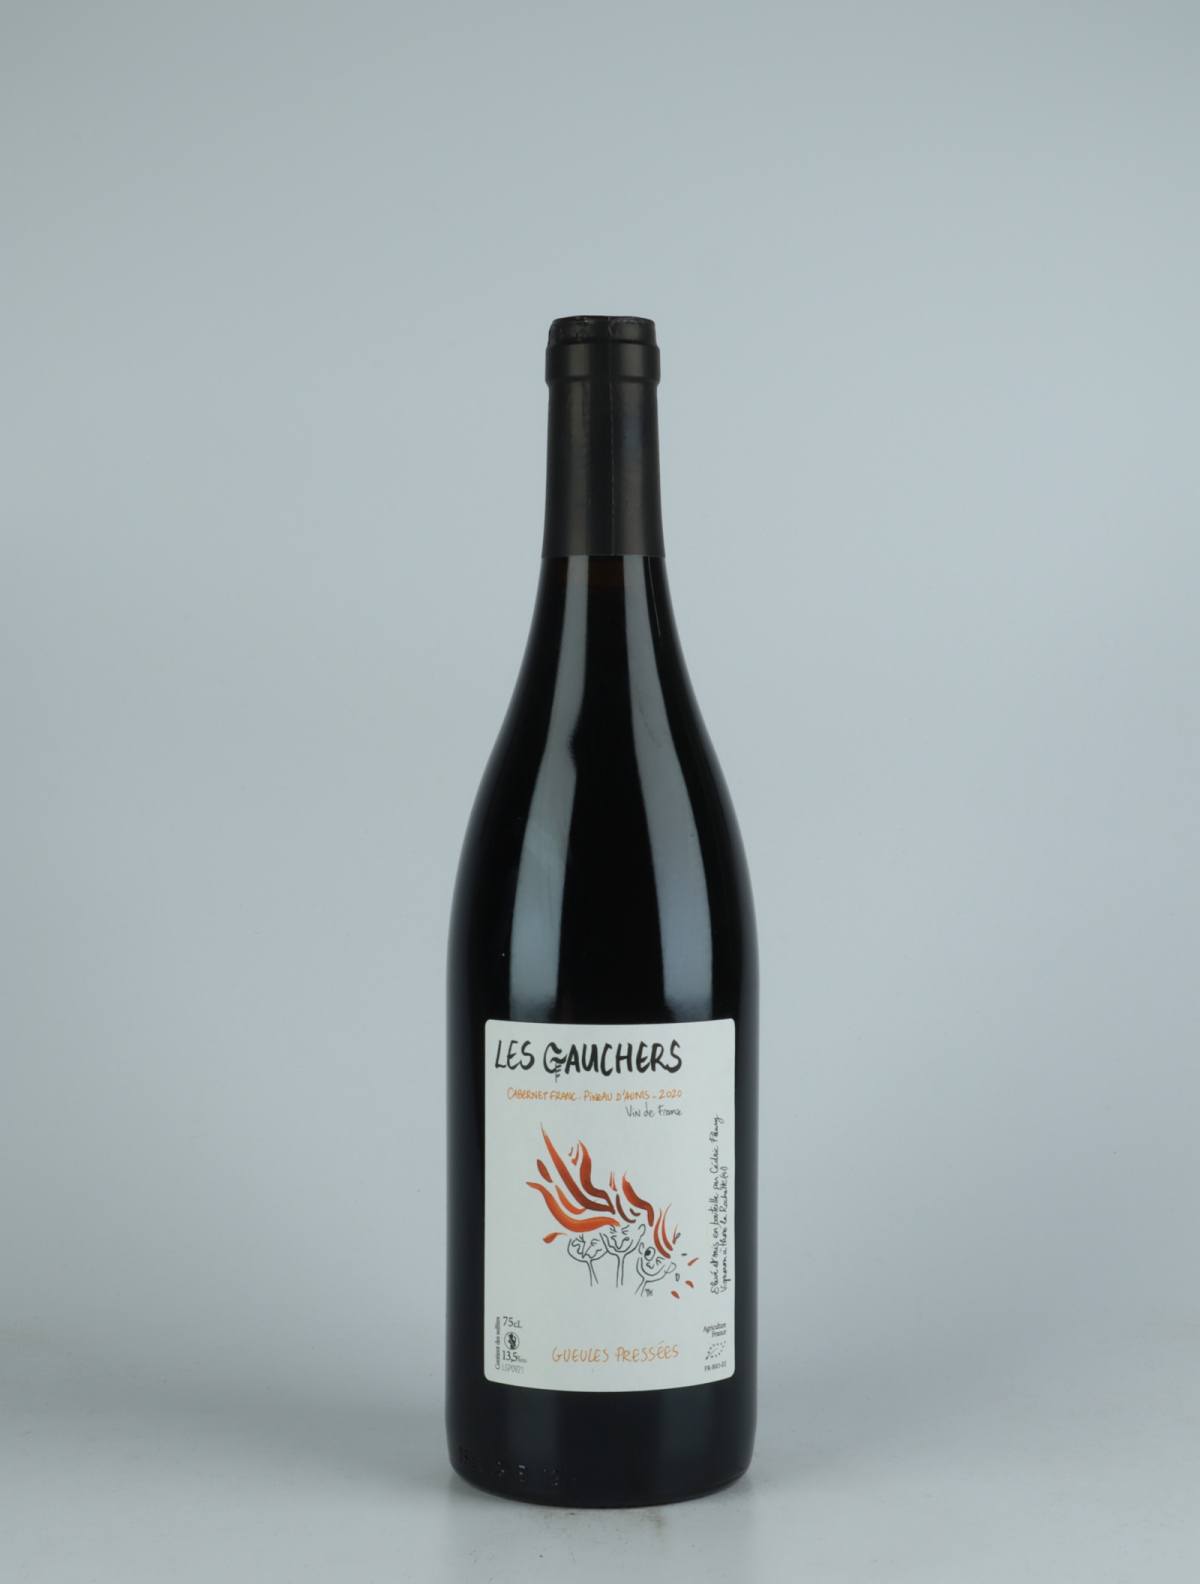 A bottle 2020 Gueules Pressées Red wine from Les Gauchers, Loire in France